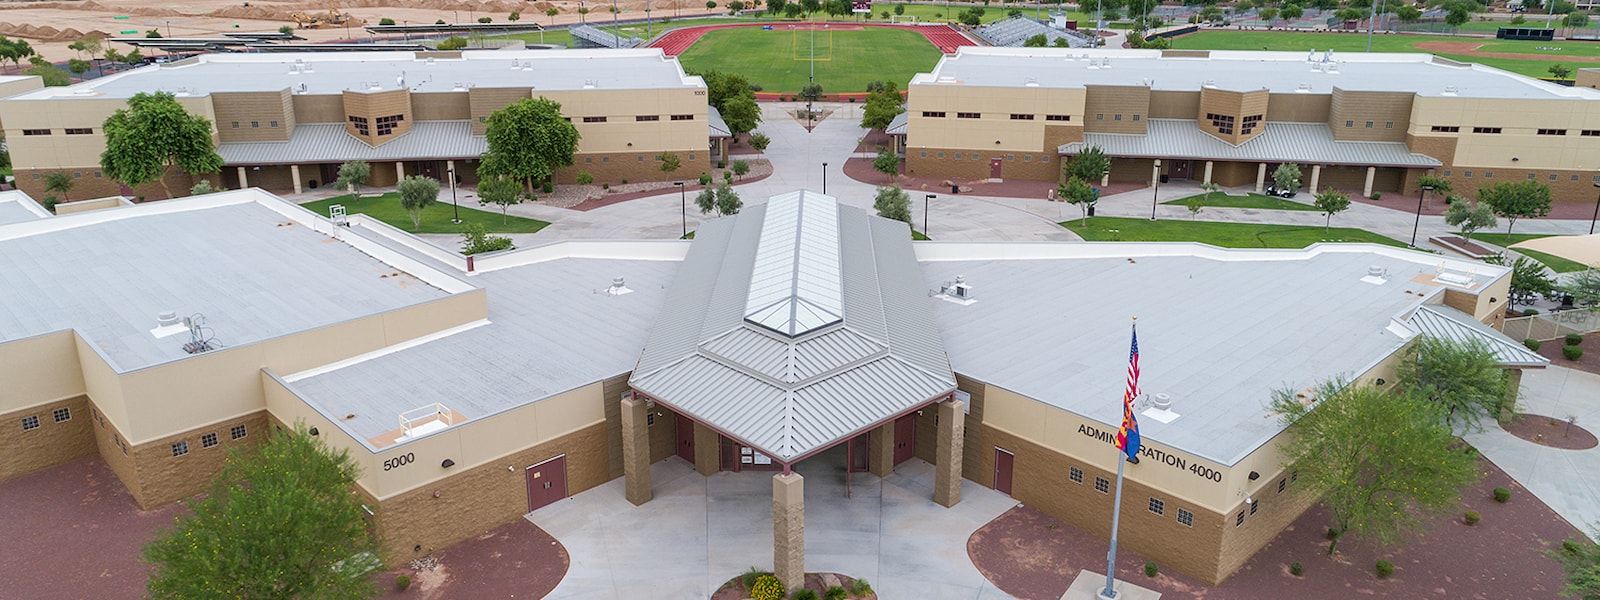 Overhead view of the Shadow Ridge Campus